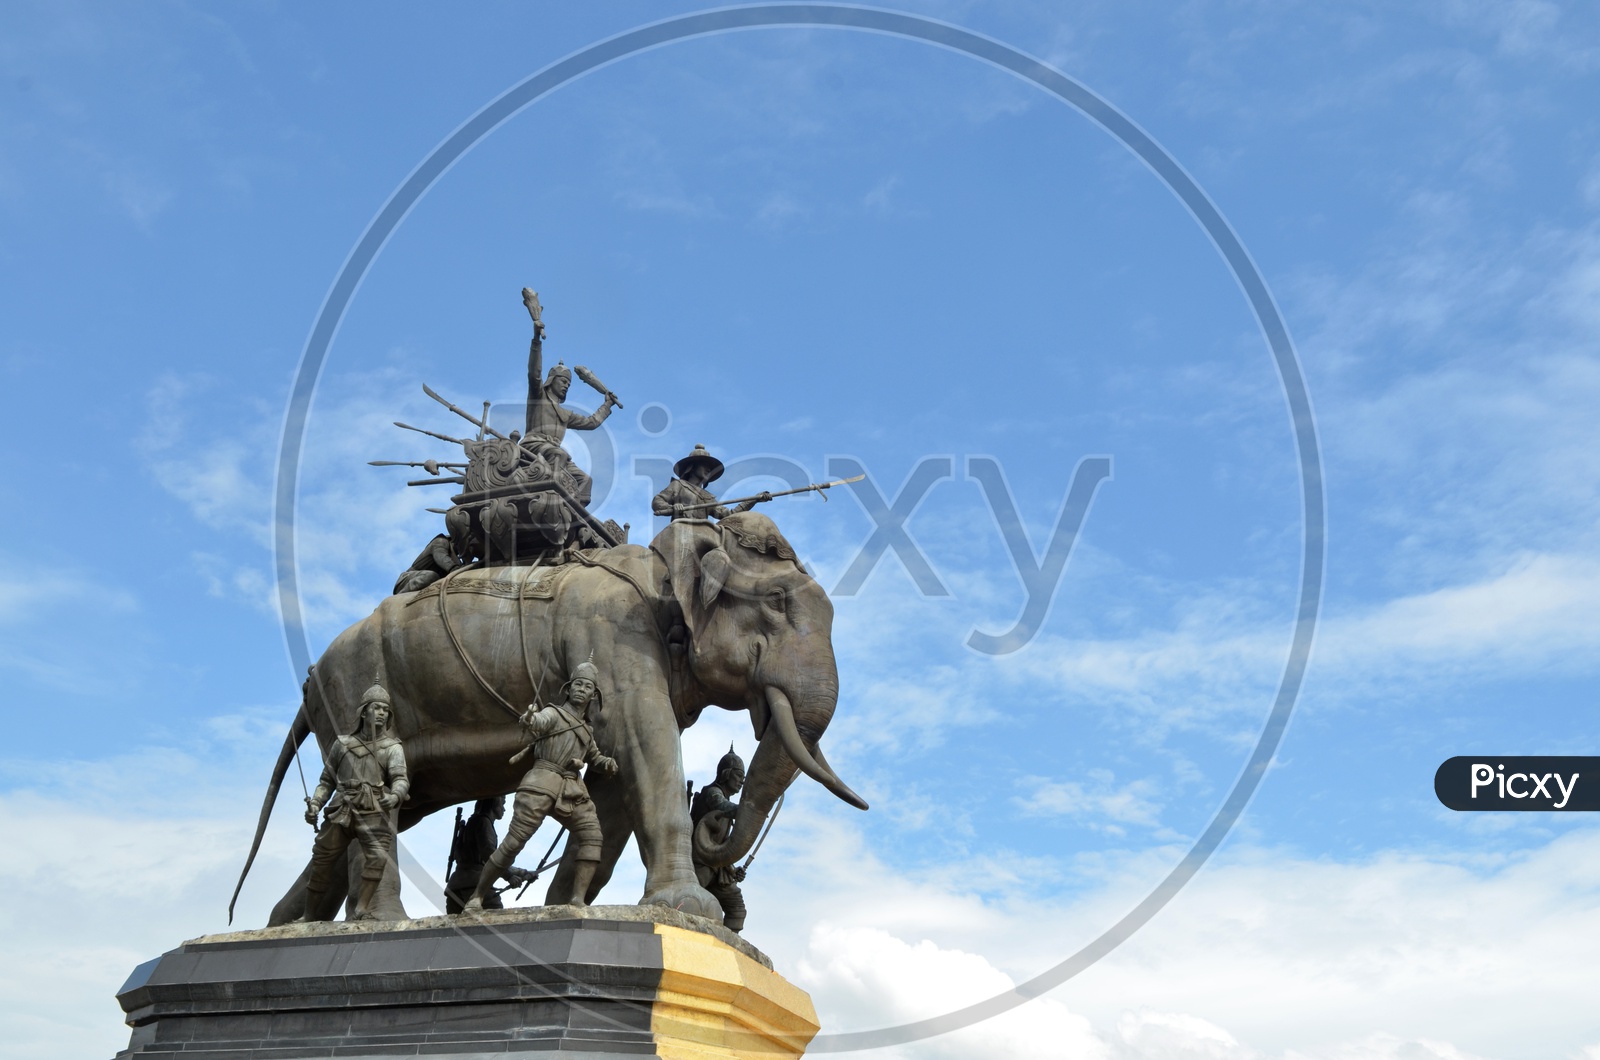 Landscape of Monument of King Naresuan at Suphanburi province in Thailand